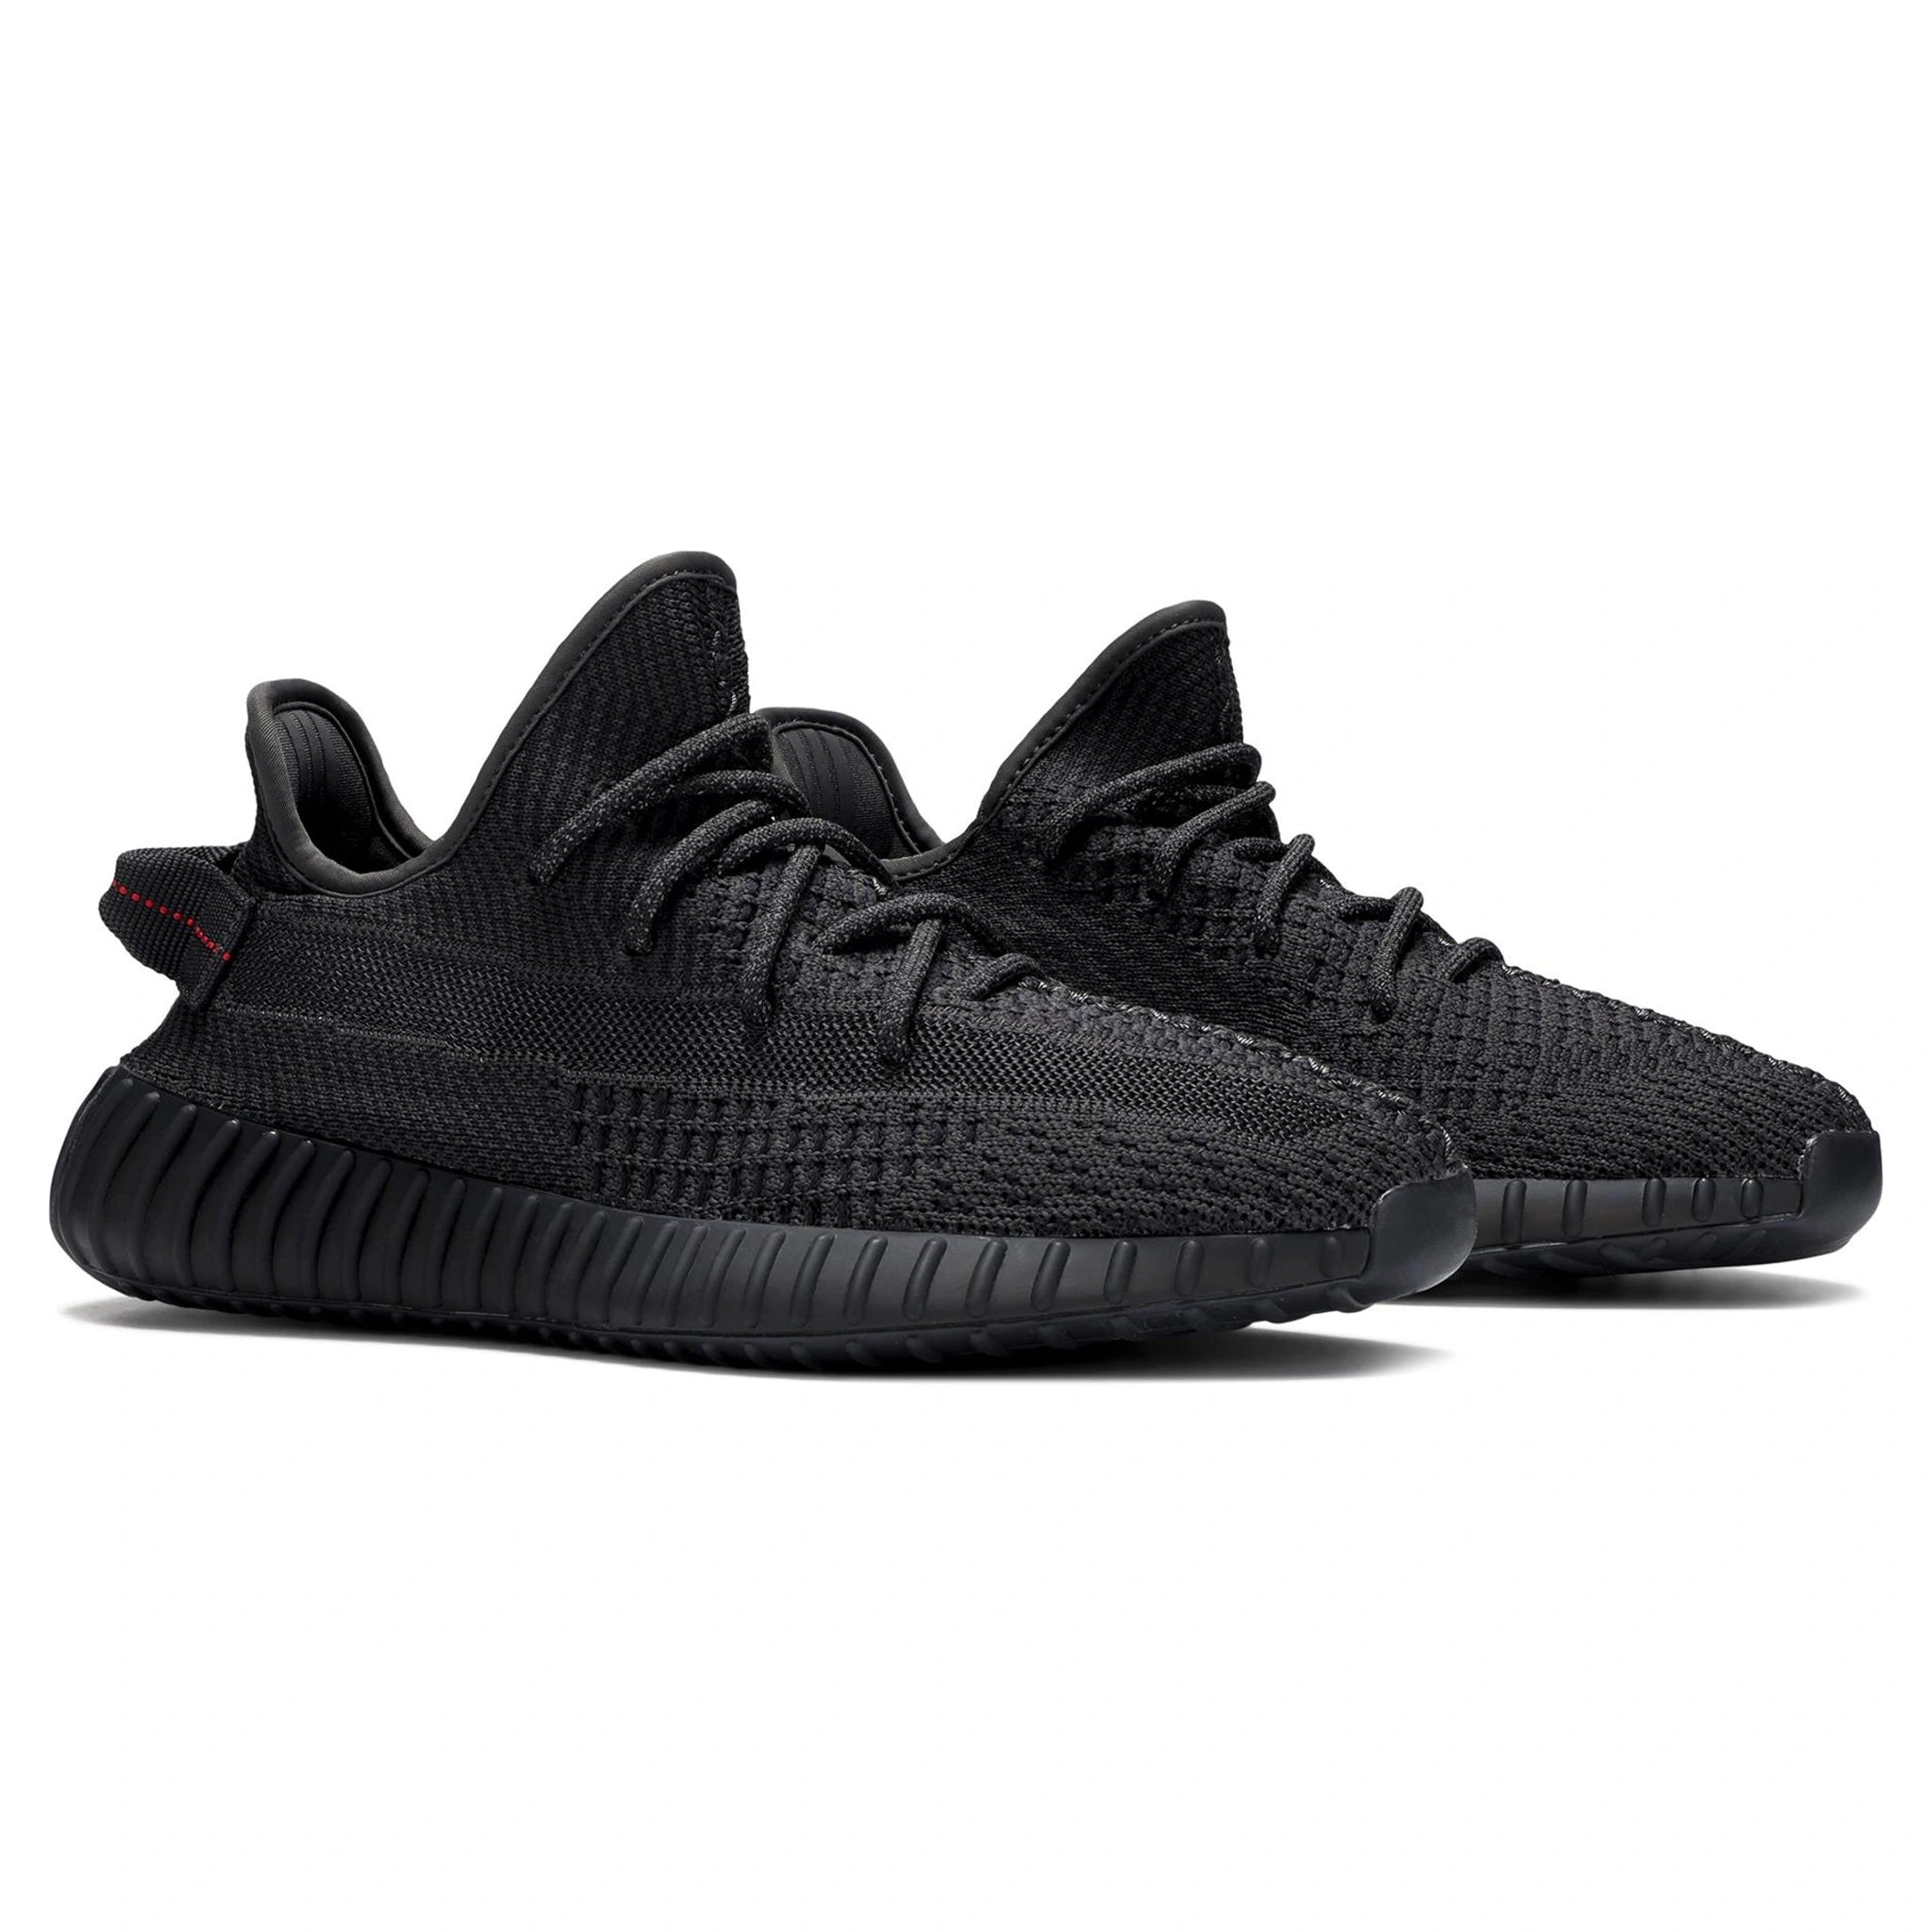 Front side view of Adidas Yeezy Boost 350 V2 Static Black Non Reflective FU9006